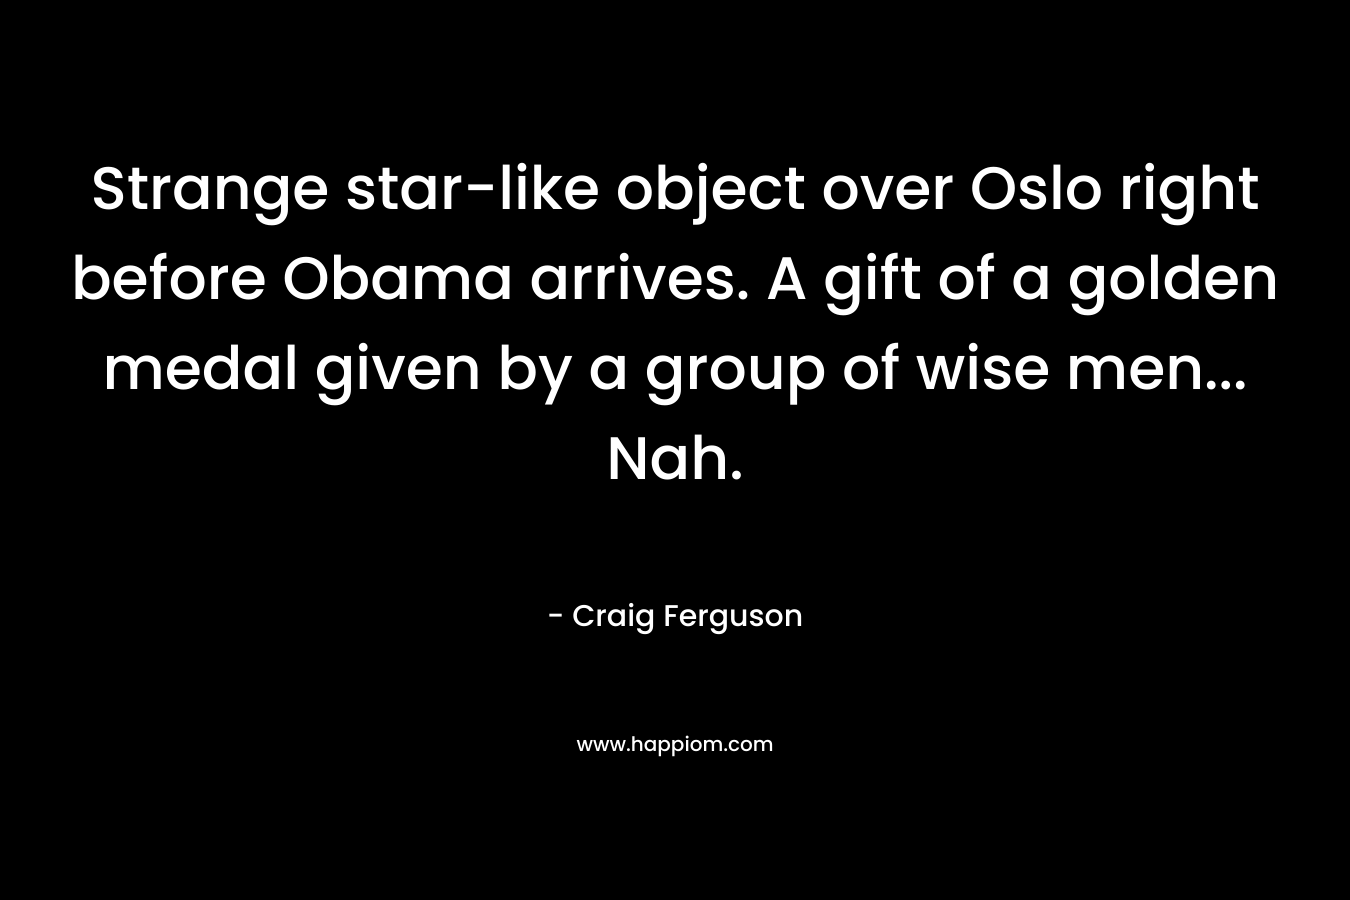 Strange star-like object over Oslo right before Obama arrives. A gift of a golden medal given by a group of wise men… Nah. – Craig Ferguson